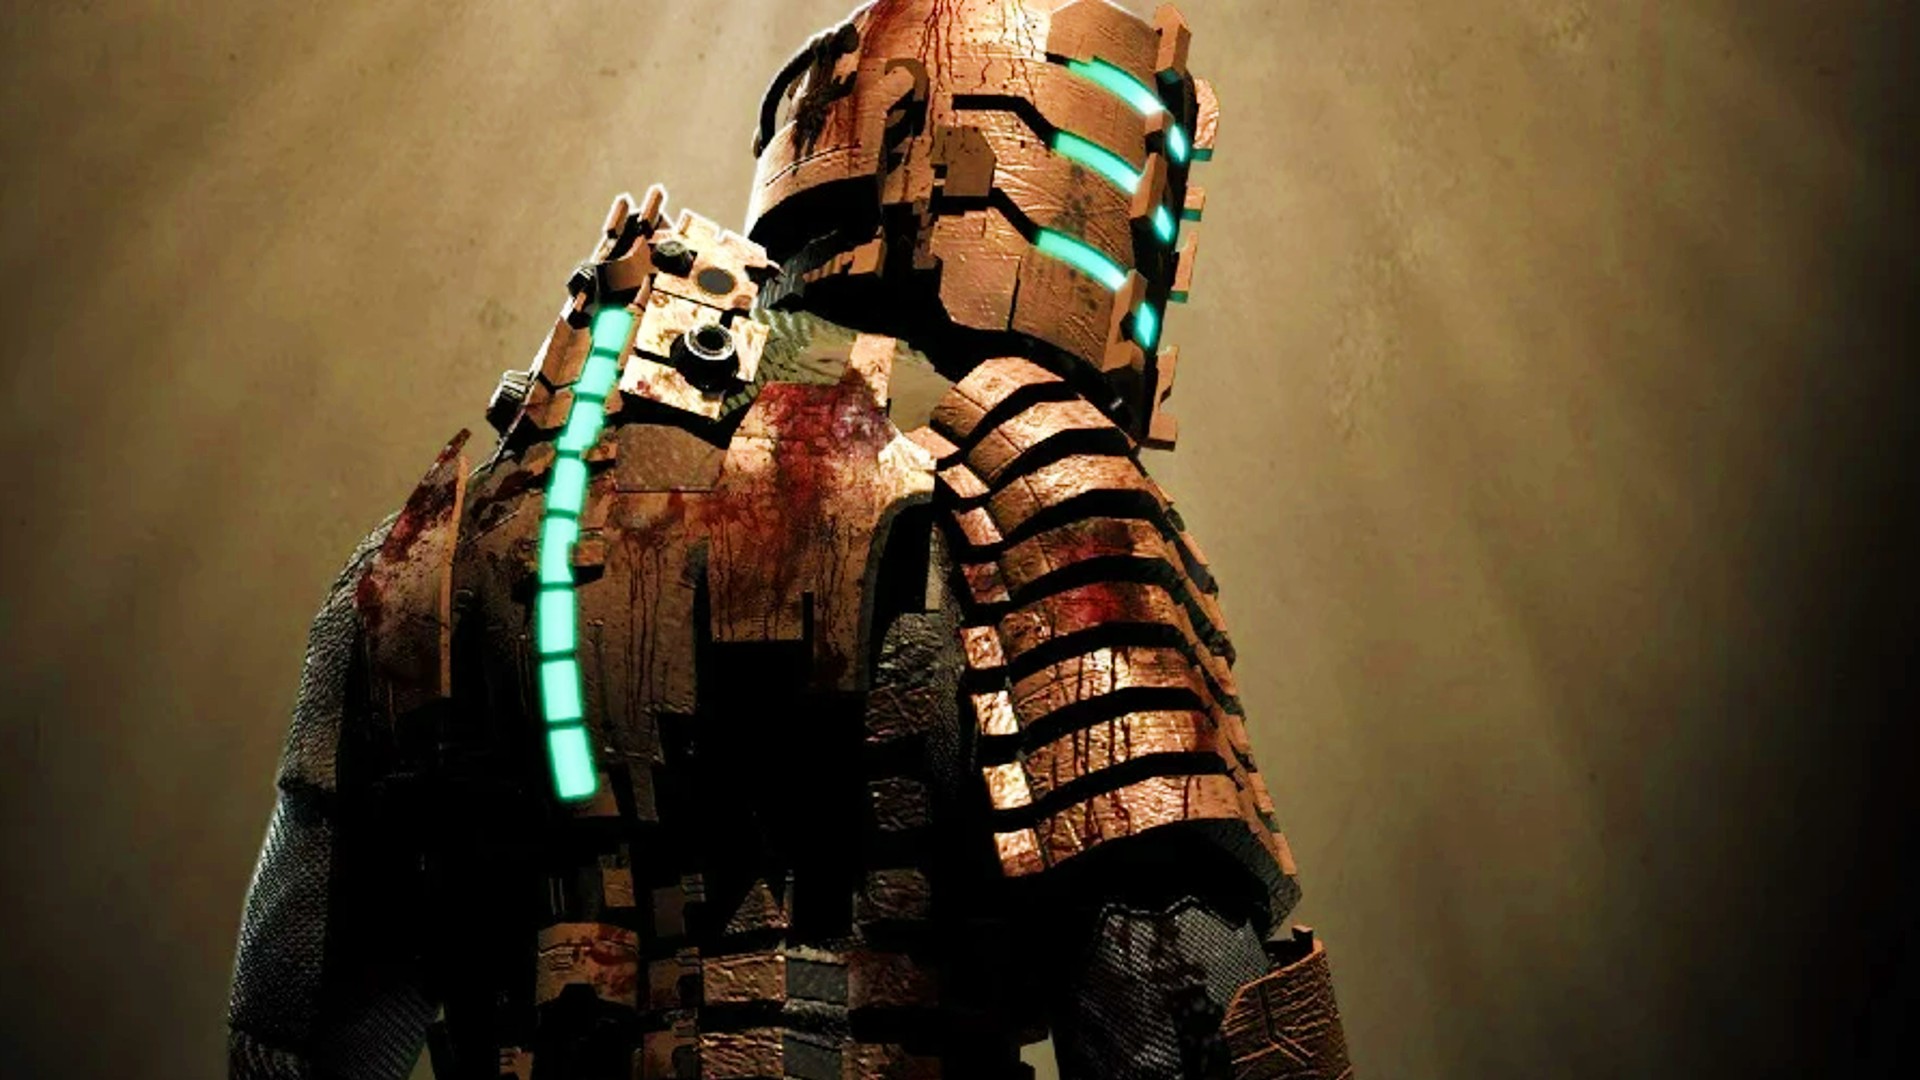 Finished Dead Space Remake? Try this free demake, available now